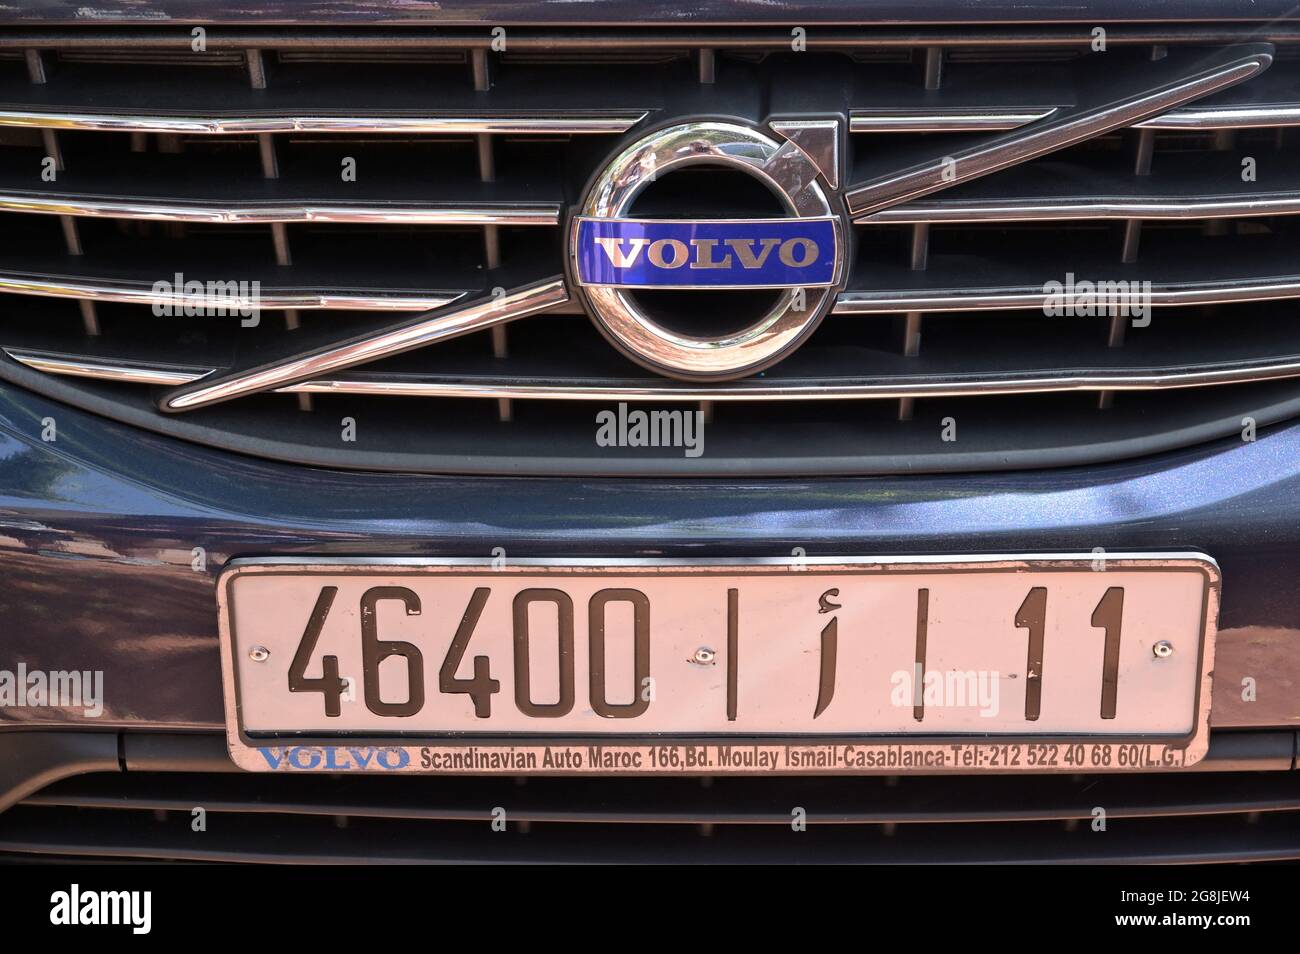 Une plaque d'immatriculation marocaine sur une voiture Volvo, Ourika Valley  ma Photo Stock - Alamy